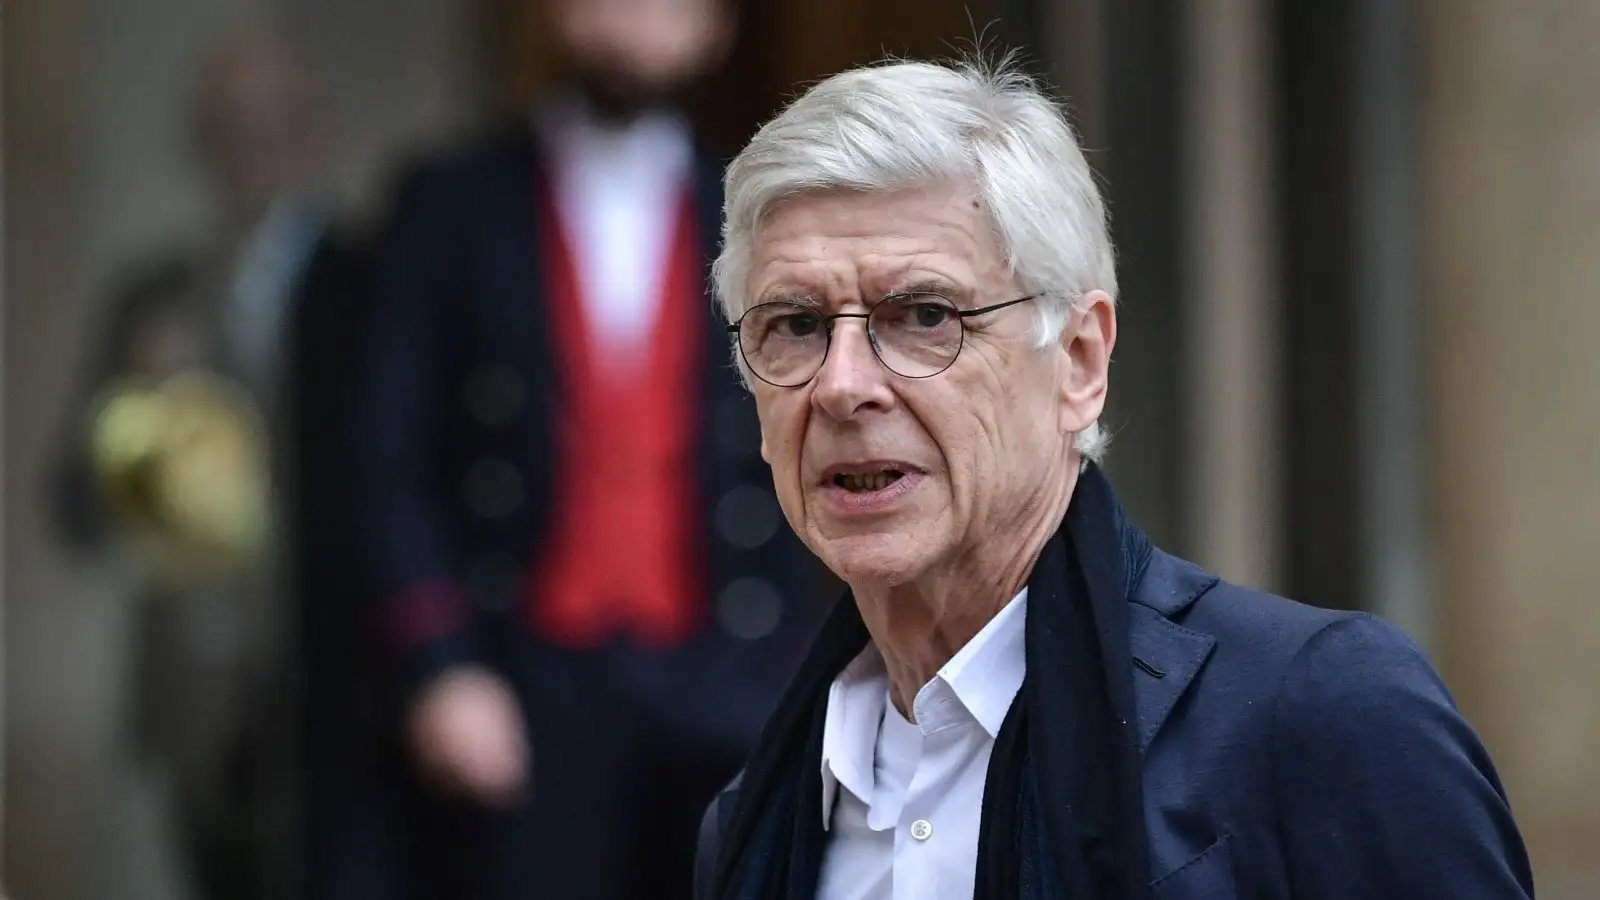 Wenger reveals how he ‘fought like mad’ to sign current Arsenal star as he draws Fabregas comparisons